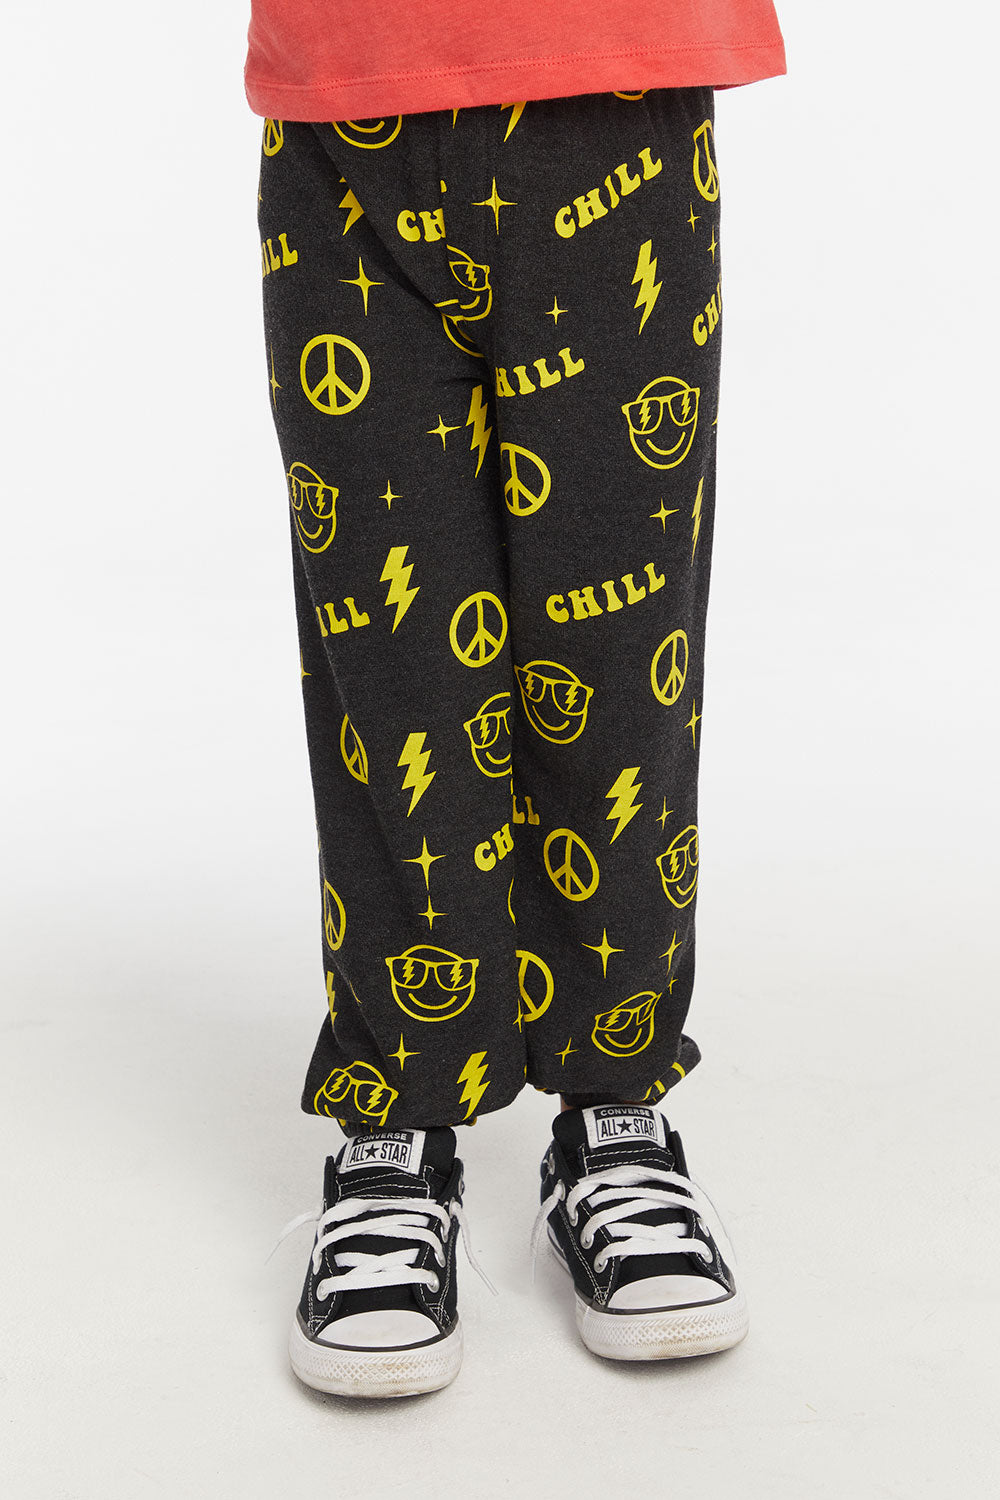 Chill Boys Pants Boys chaserbrand